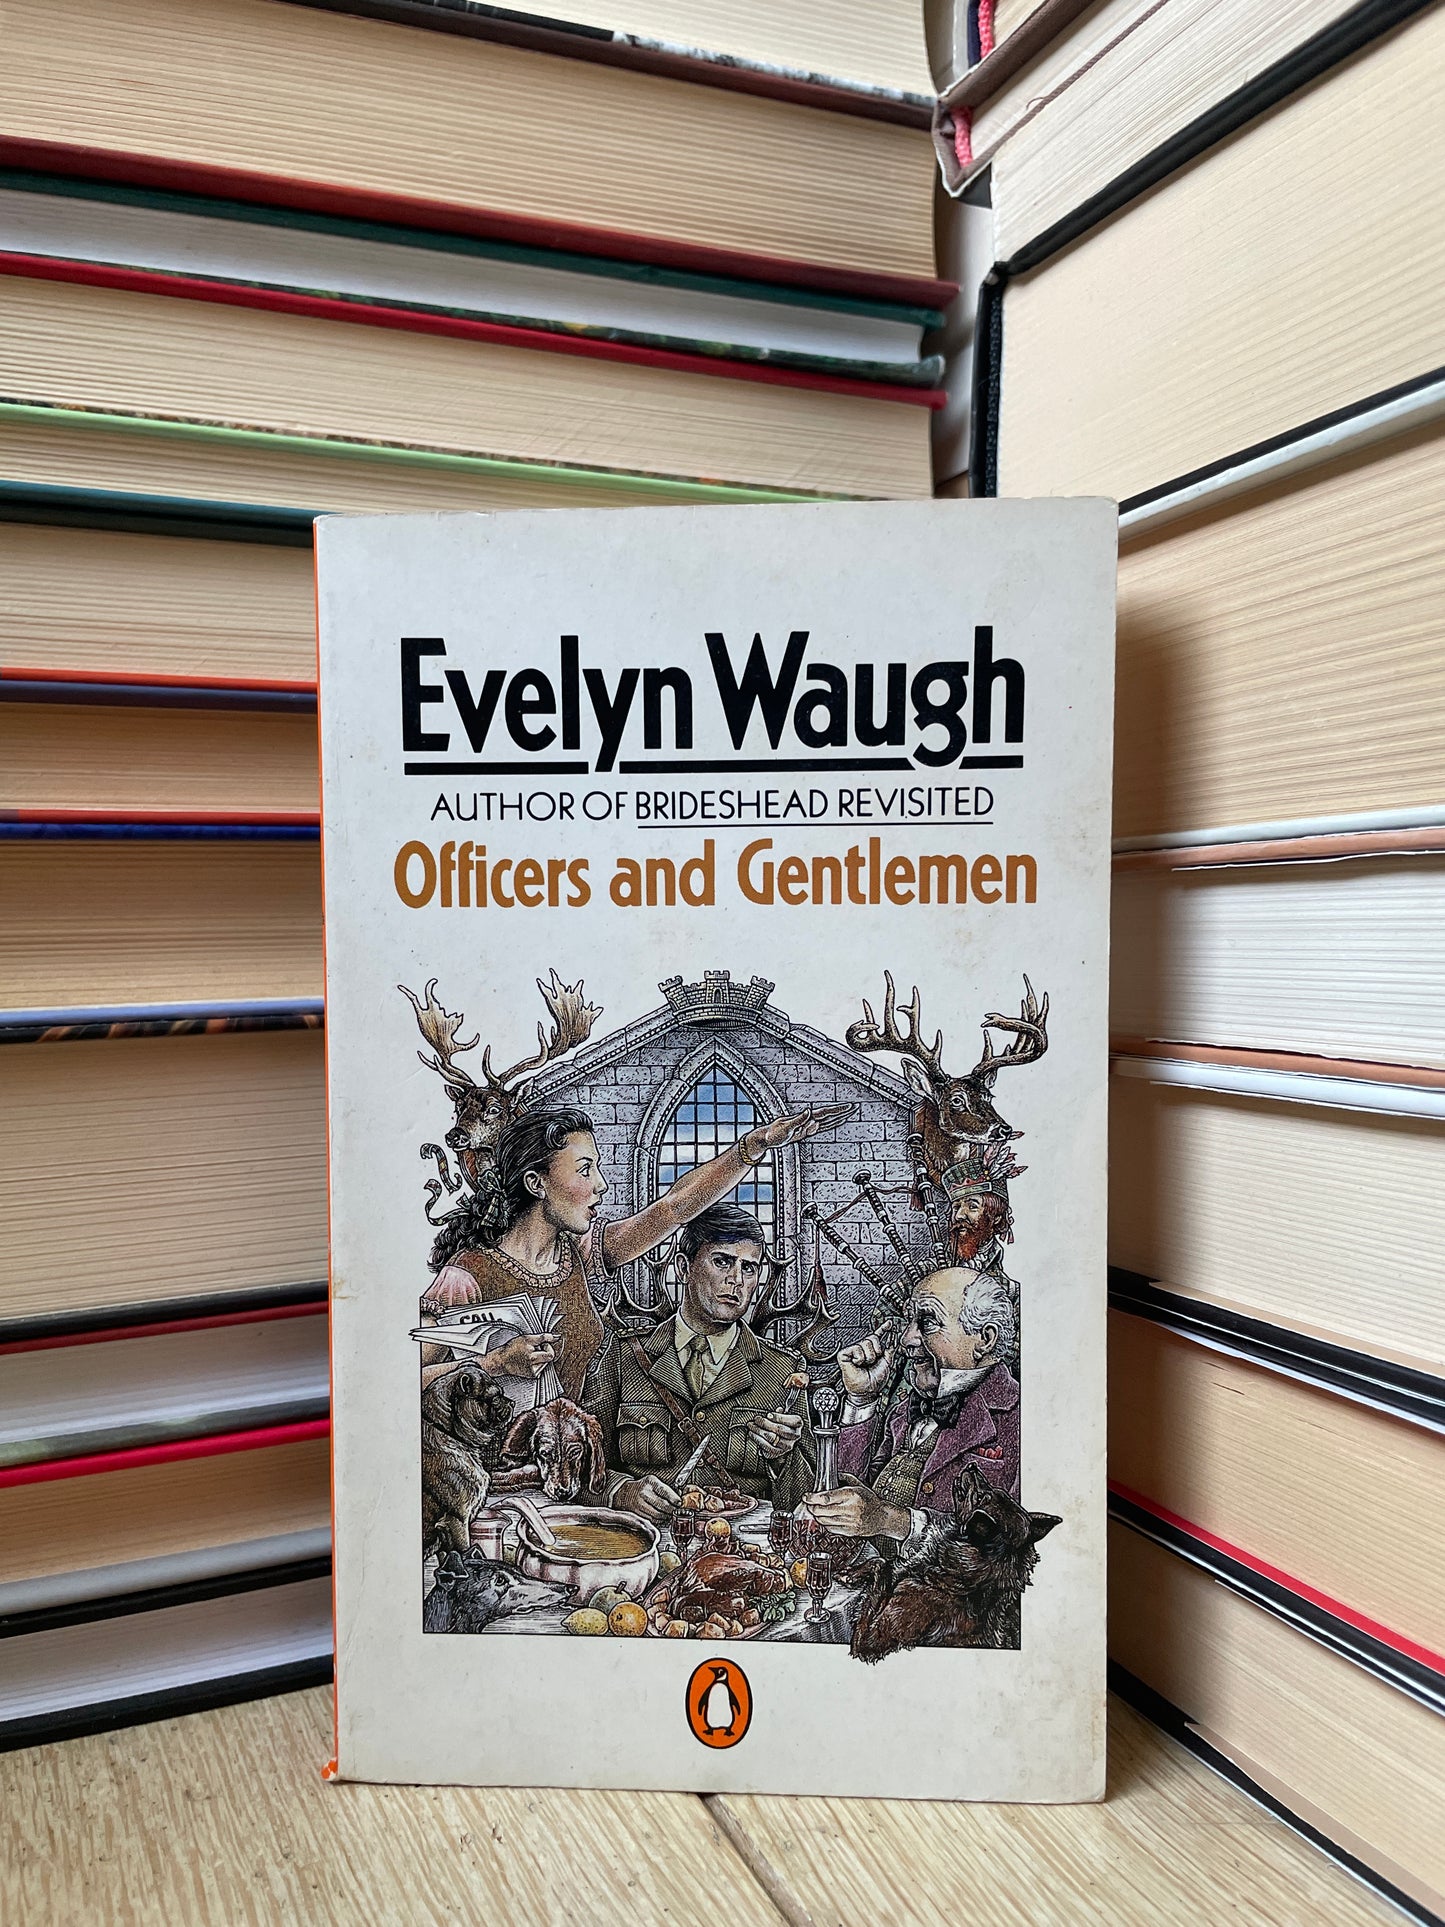 Evelyn Waugh - Officers and Gentlemen